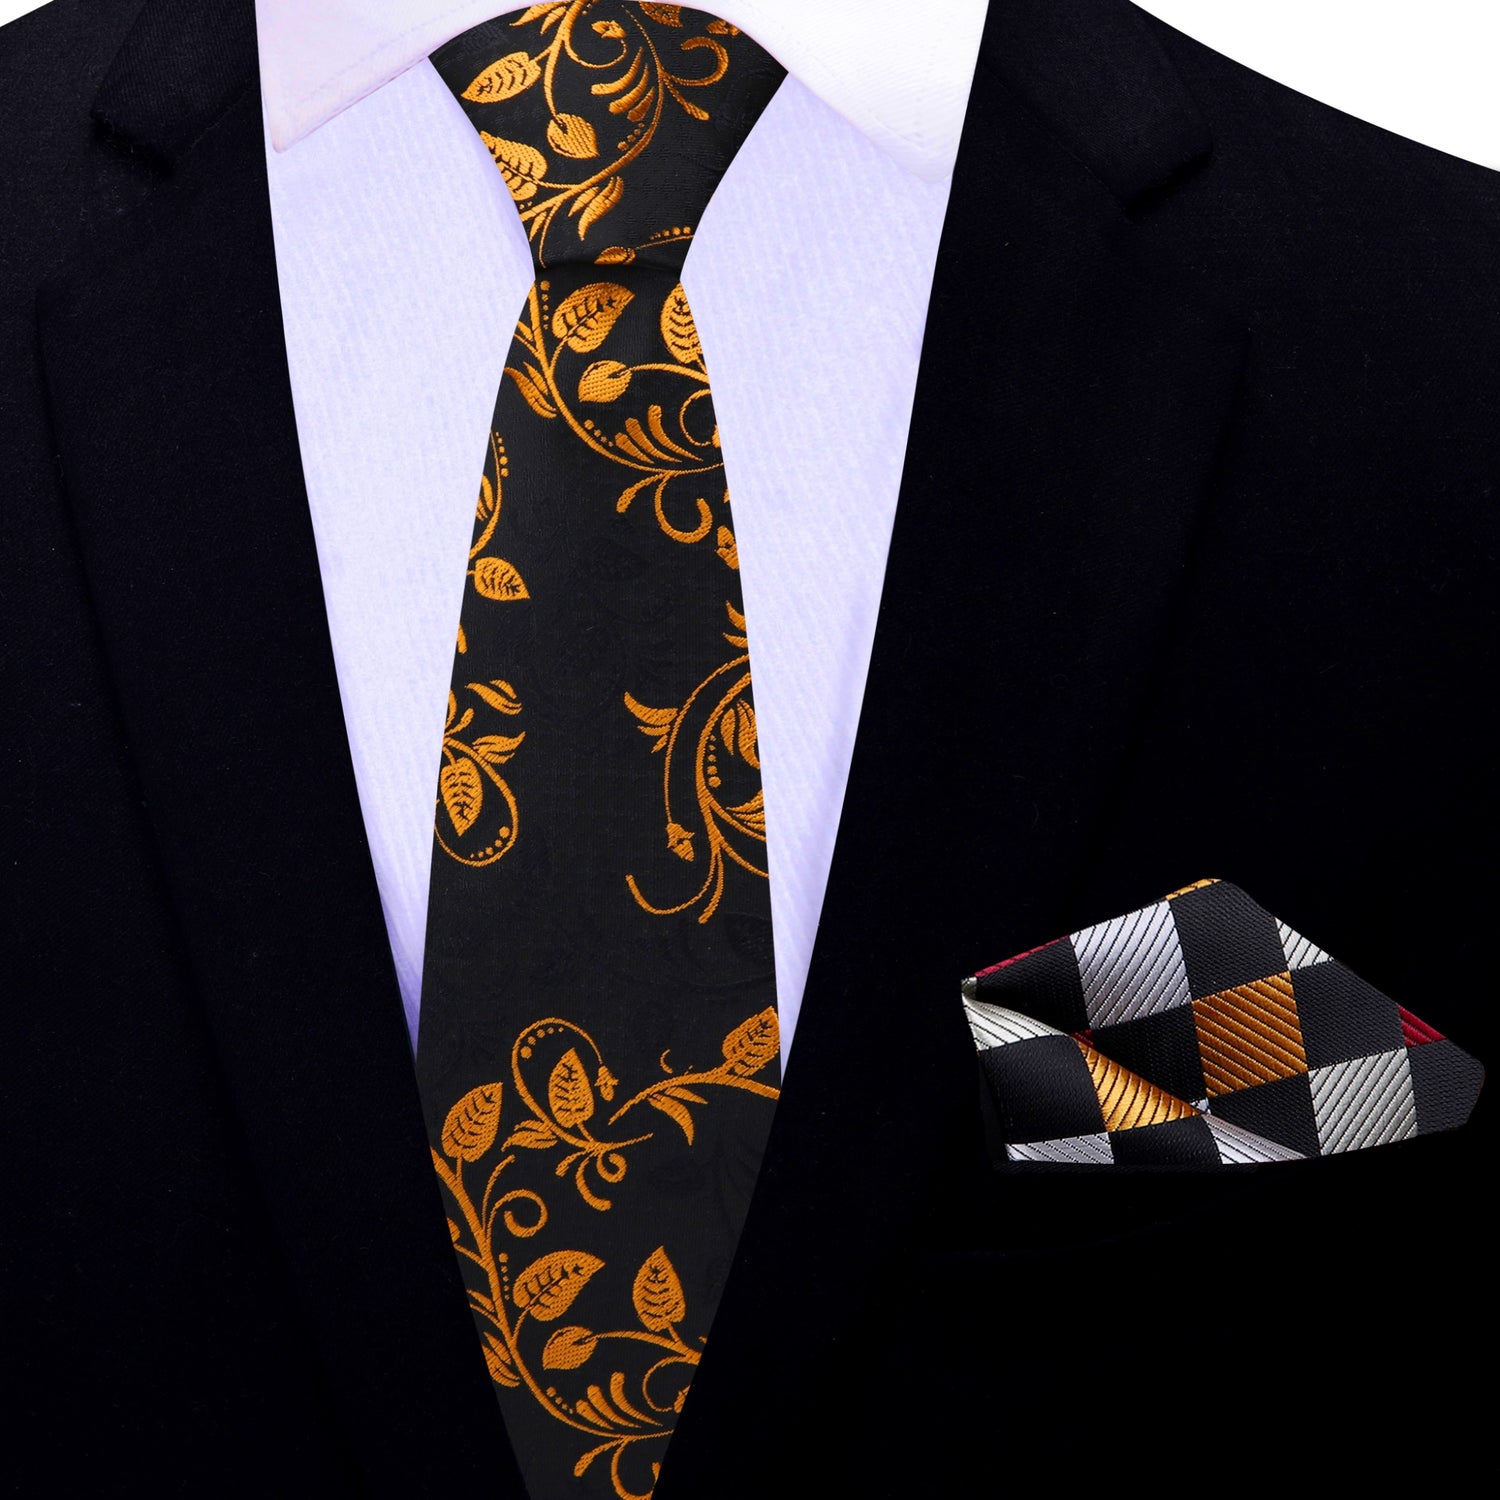 Thin Tie: Black and Gold Vines Tie with Black, Gold, Silver Burgundy Check Pocket Square